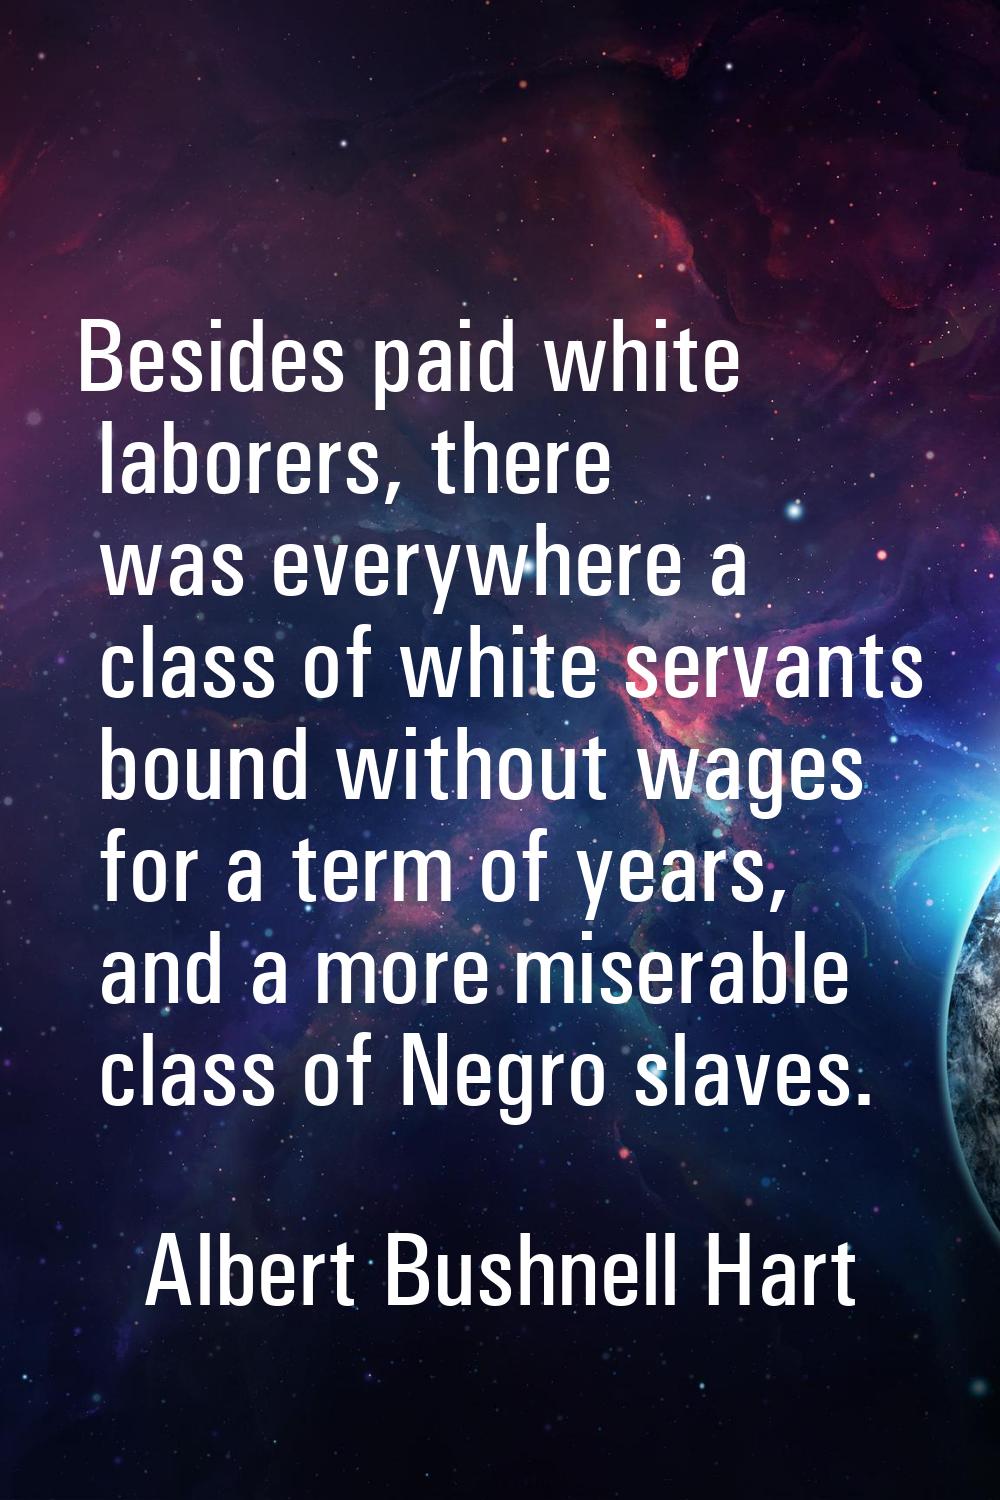 Besides paid white laborers, there was everywhere a class of white servants bound without wages for